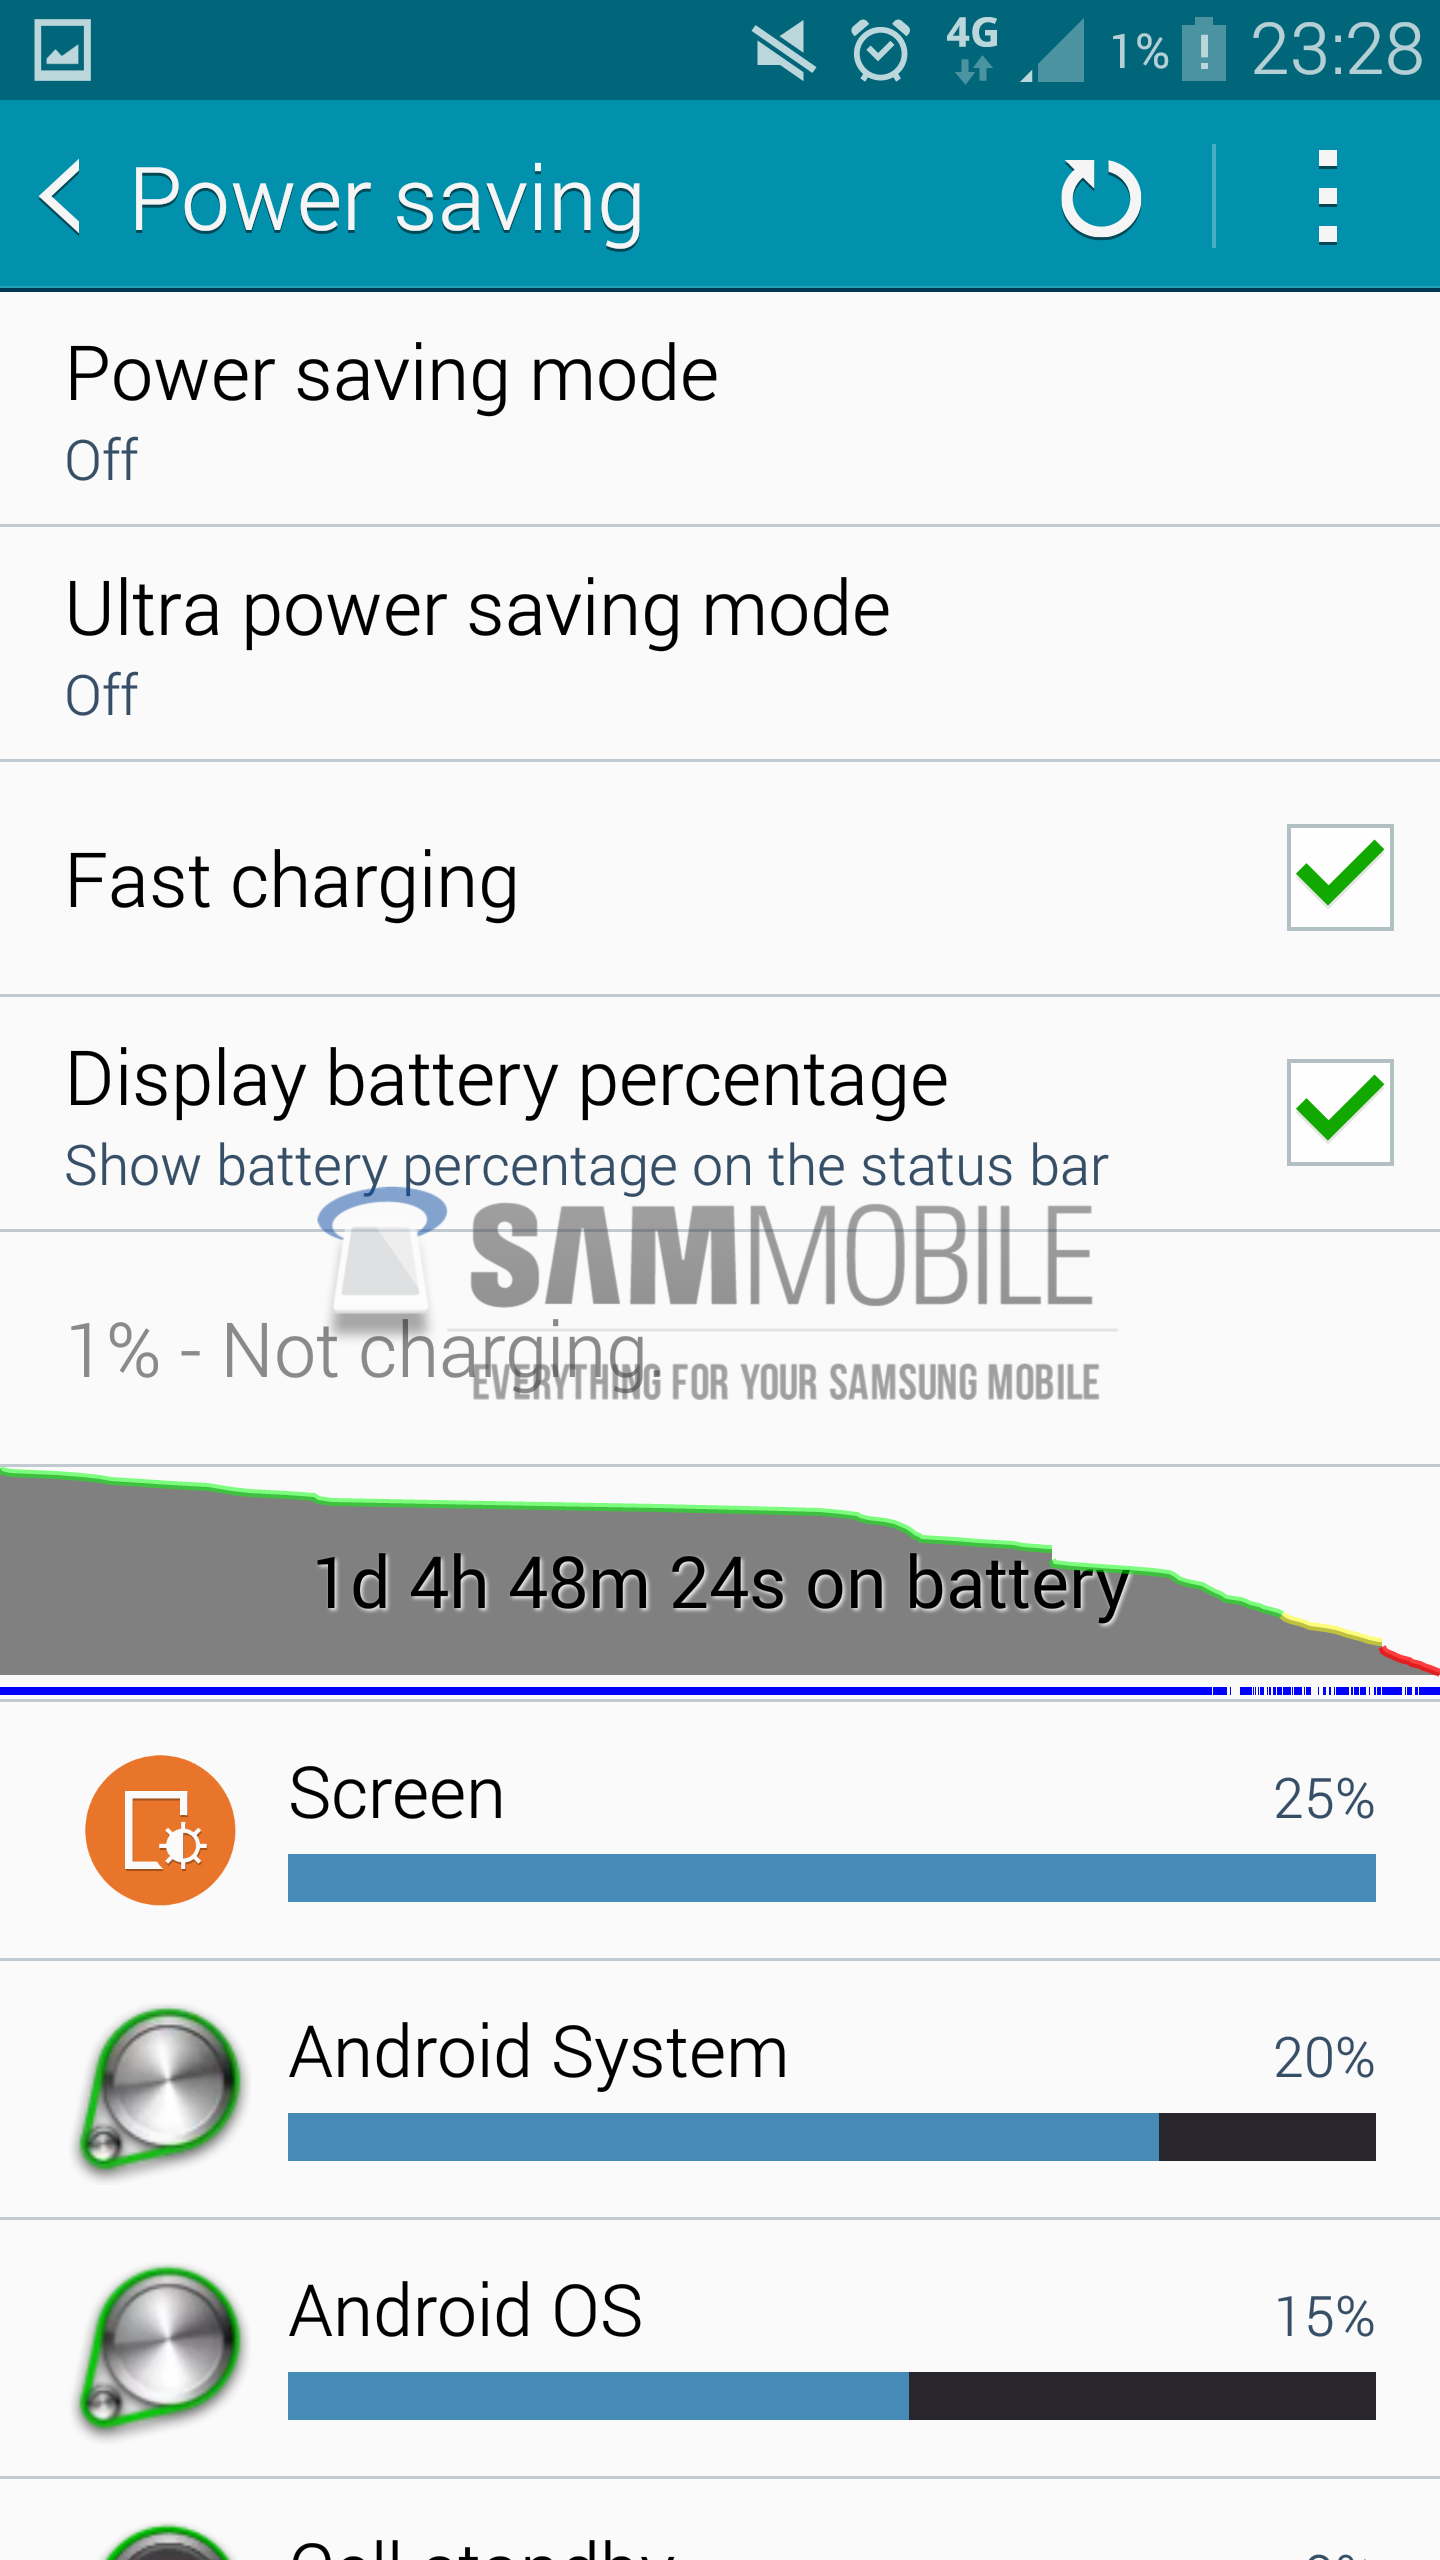 Update rolling for Samsung Galaxy Note 4 ahead of global launch